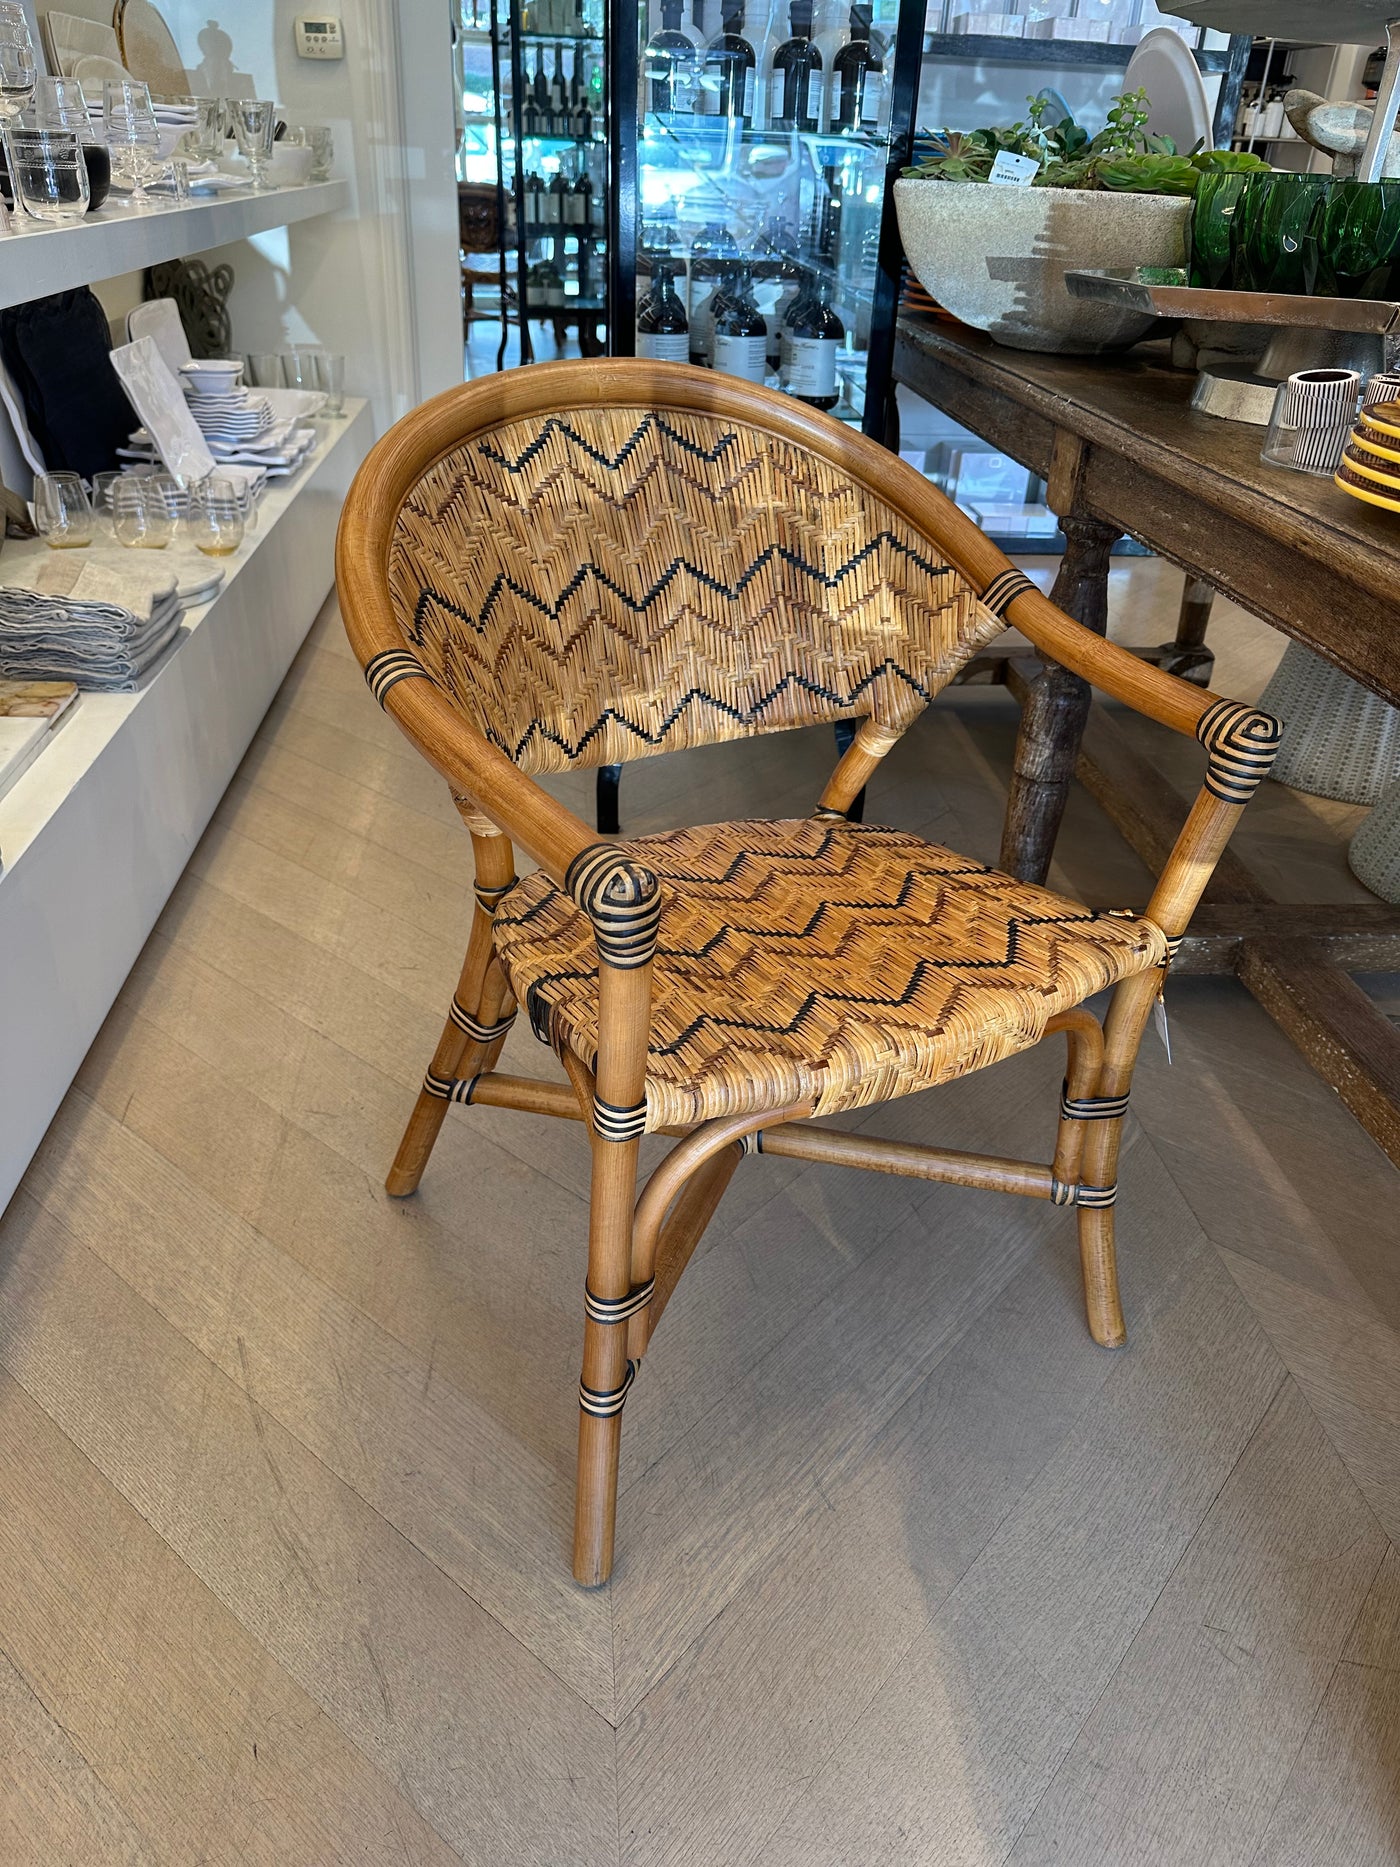 DINING CHAIR NATURAL RATTAN